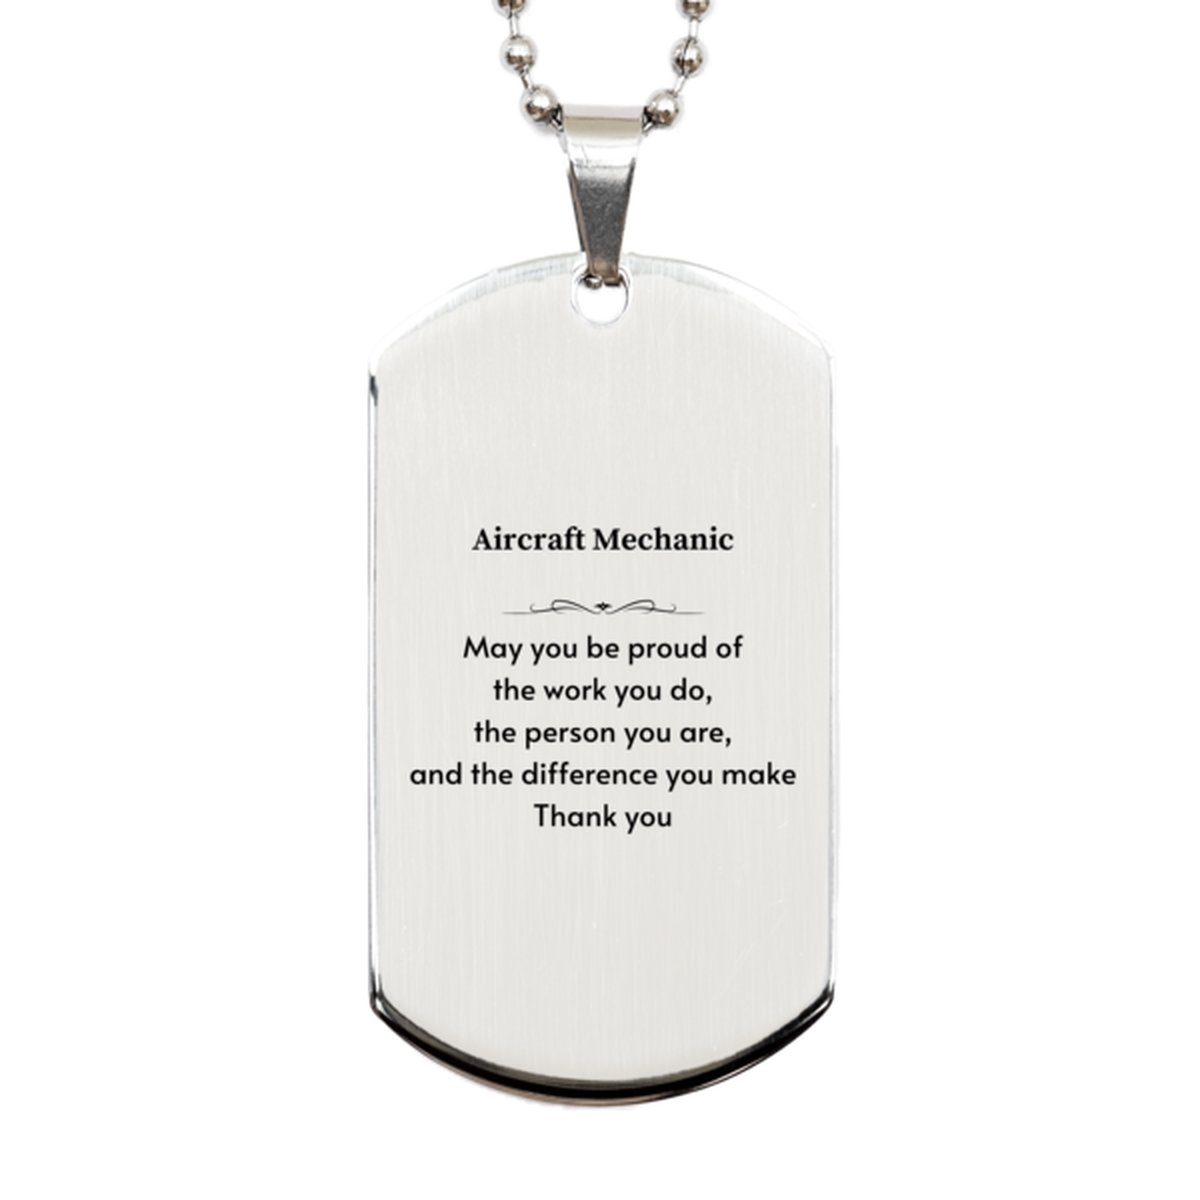 Heartwarming Silver Dog Tag Retirement Coworkers Gifts for Aircraft Mechanic, Aircraft Mechanic May You be proud of the work you do, the person you are Gifts for Boss Men Women Friends